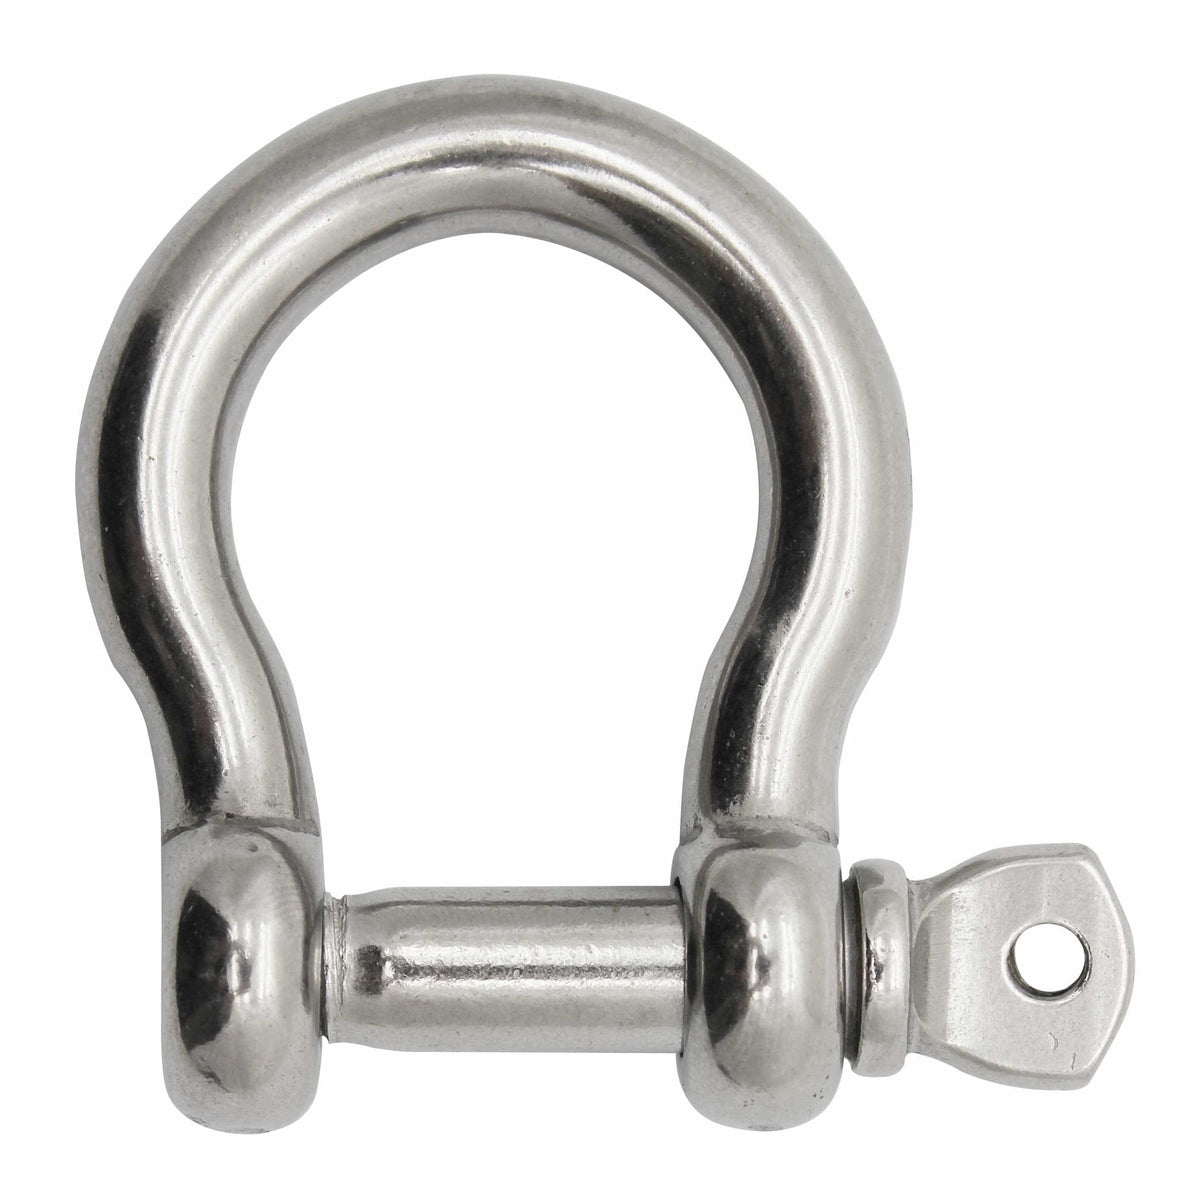 Extreme Max BoatTector SS Bow Shackle 7/8" #3006.8306